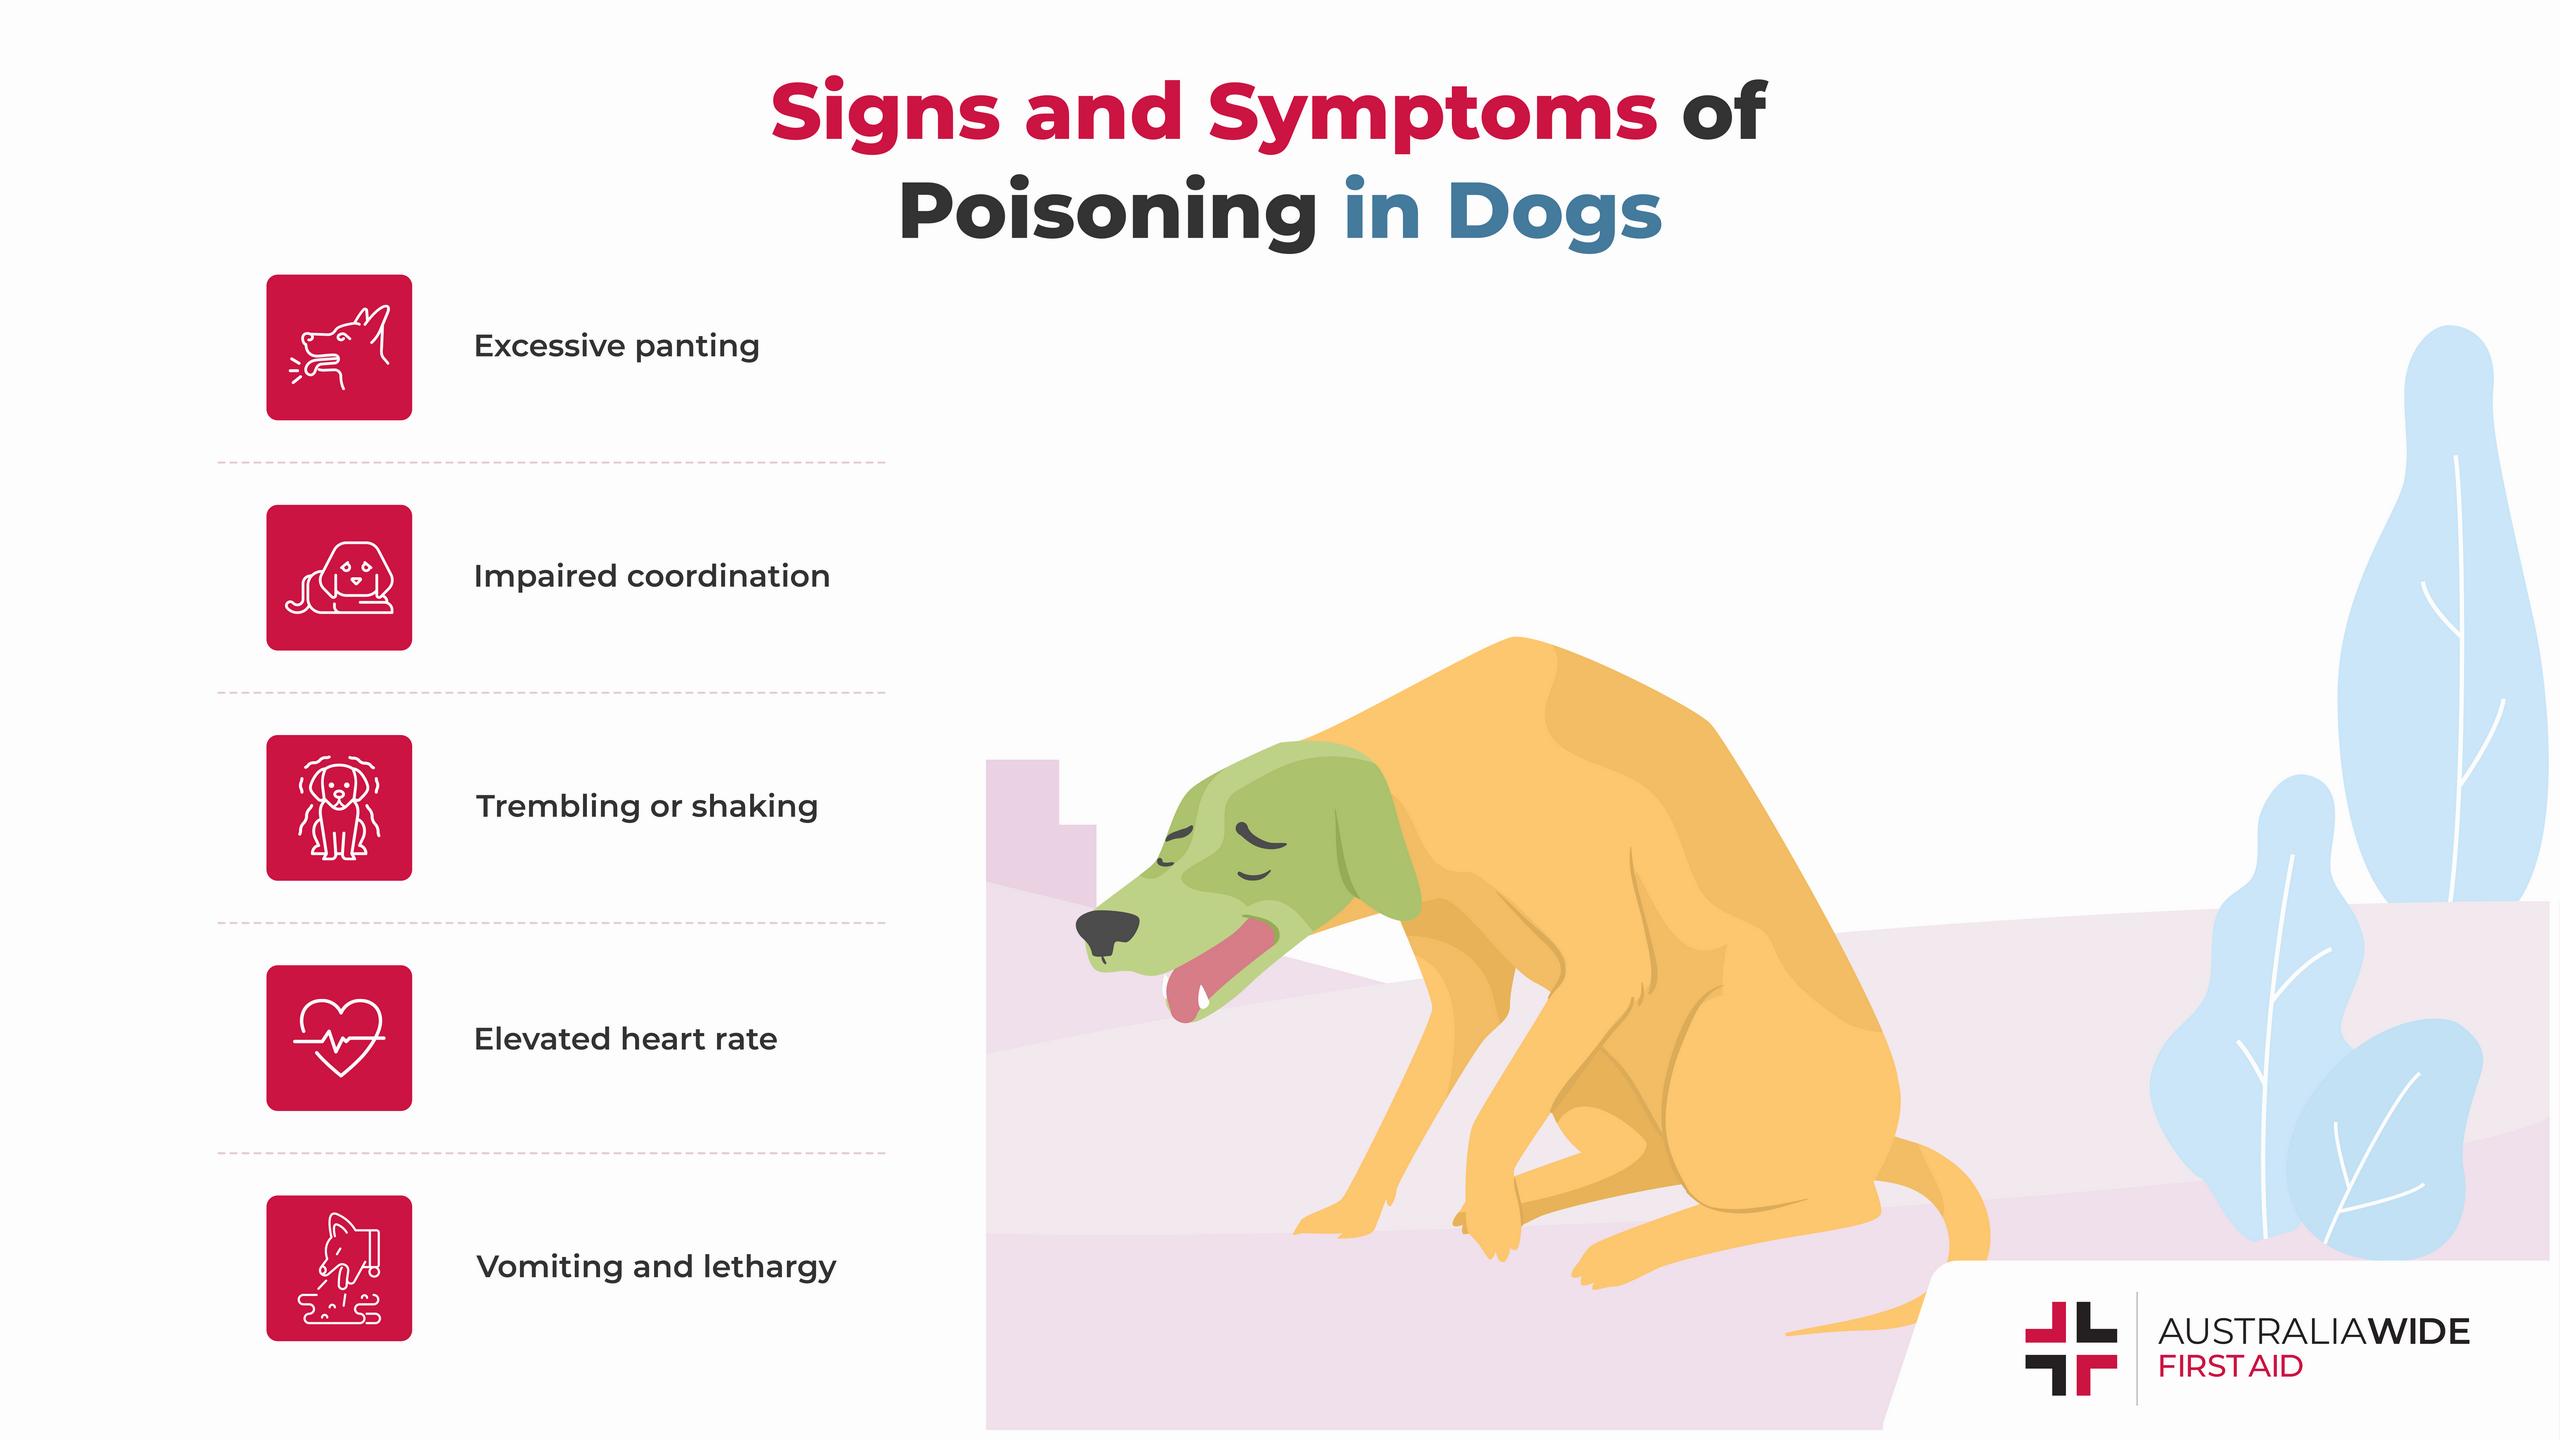 An illustration of a dog sitting on the ground with a green face and red eyes, surrounded by icons representing the signs and symptoms of poisoning in dogs.